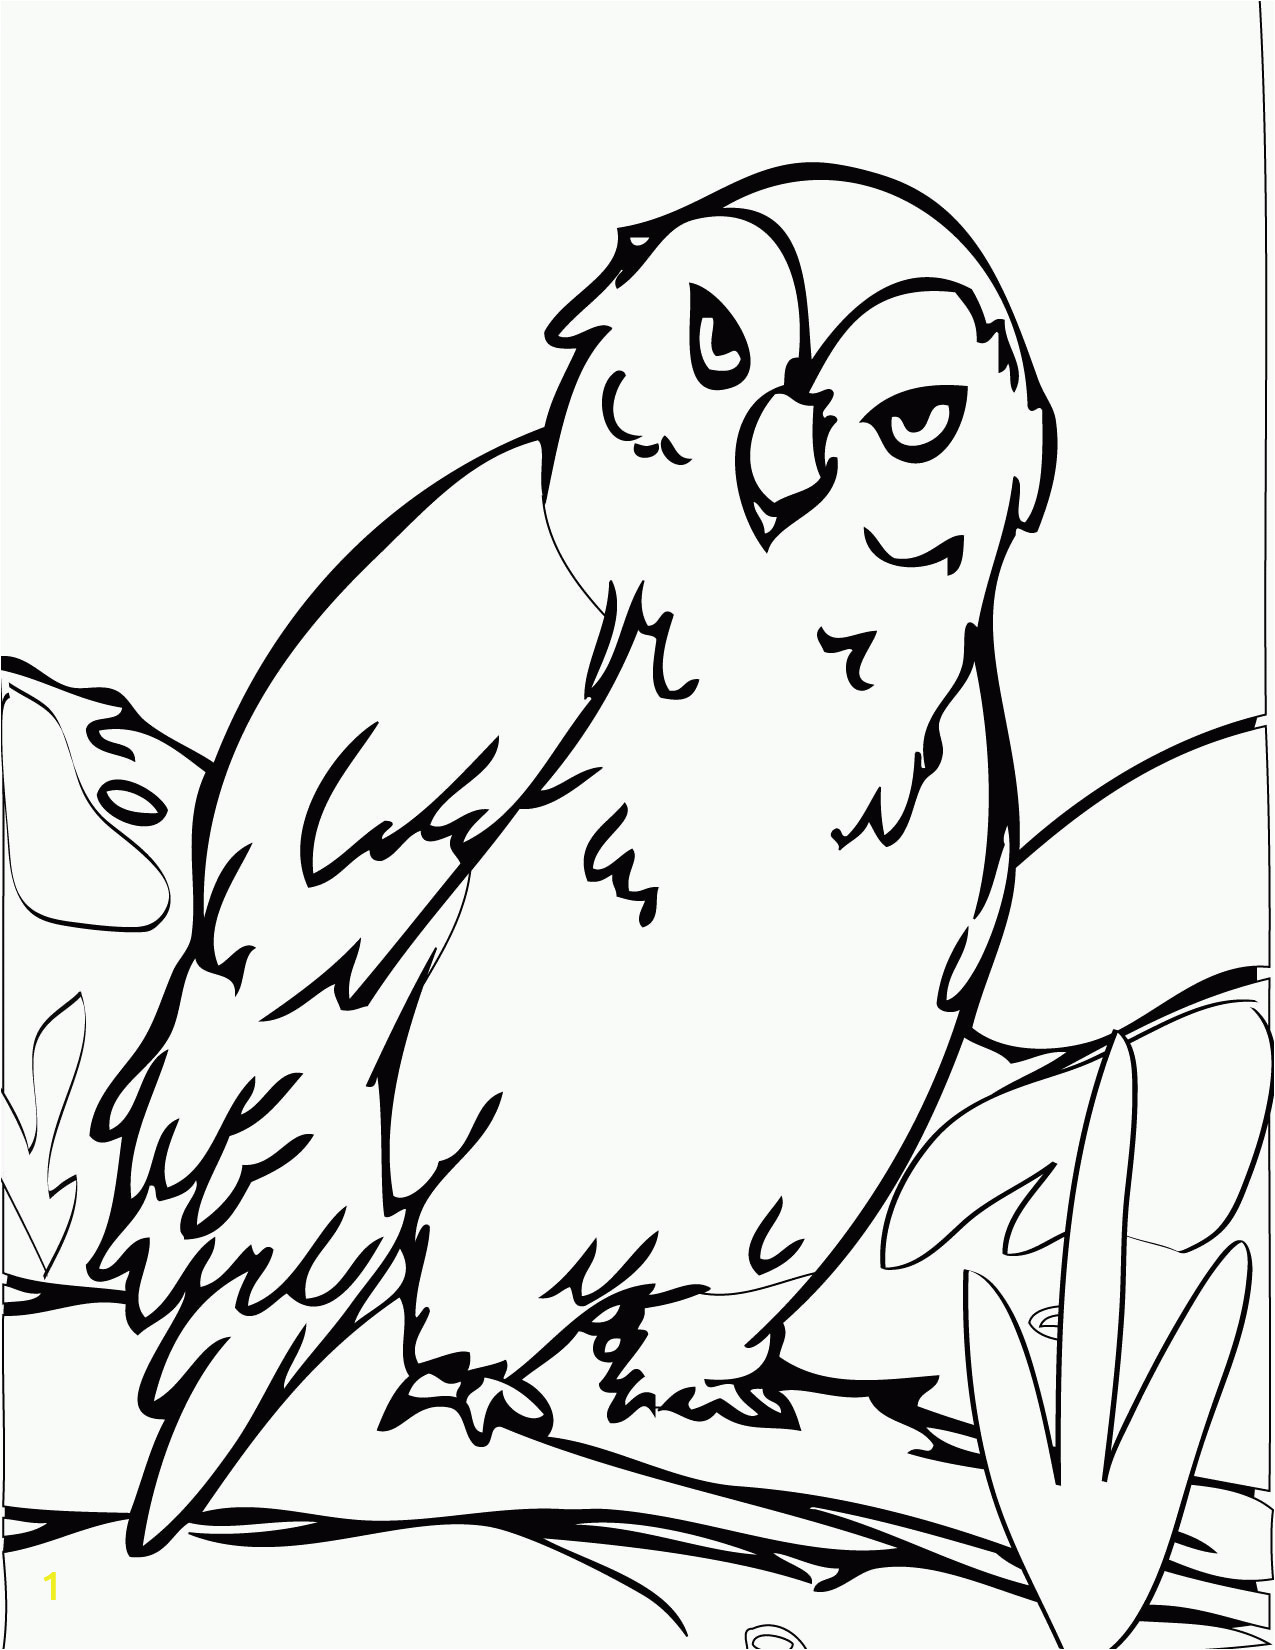 free printable arctic animals coloring pages